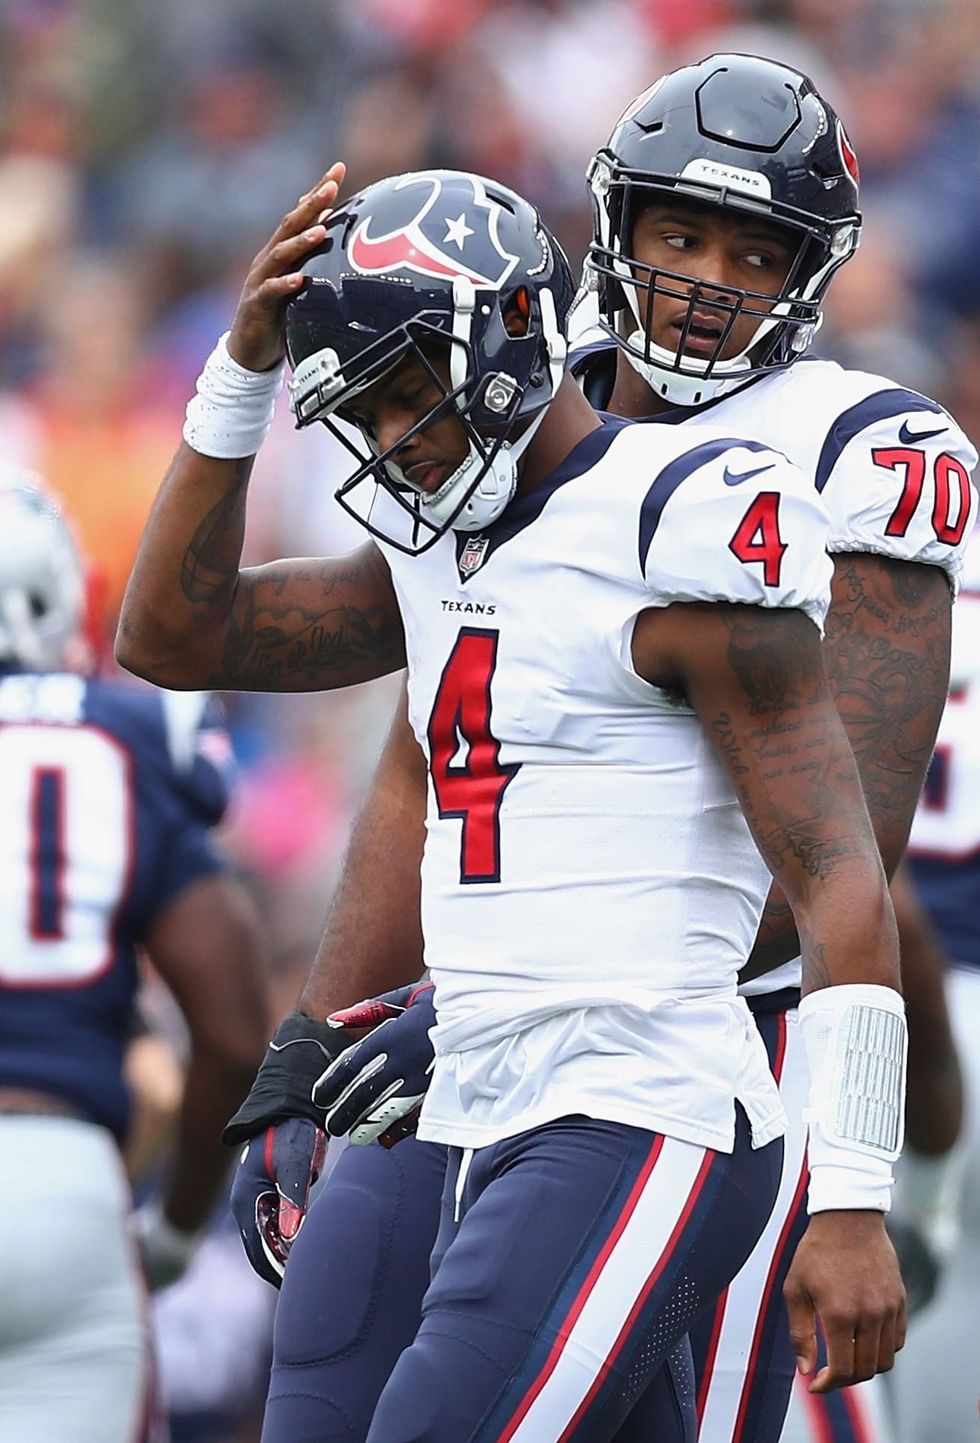 Texans are in a position to turn things around fast